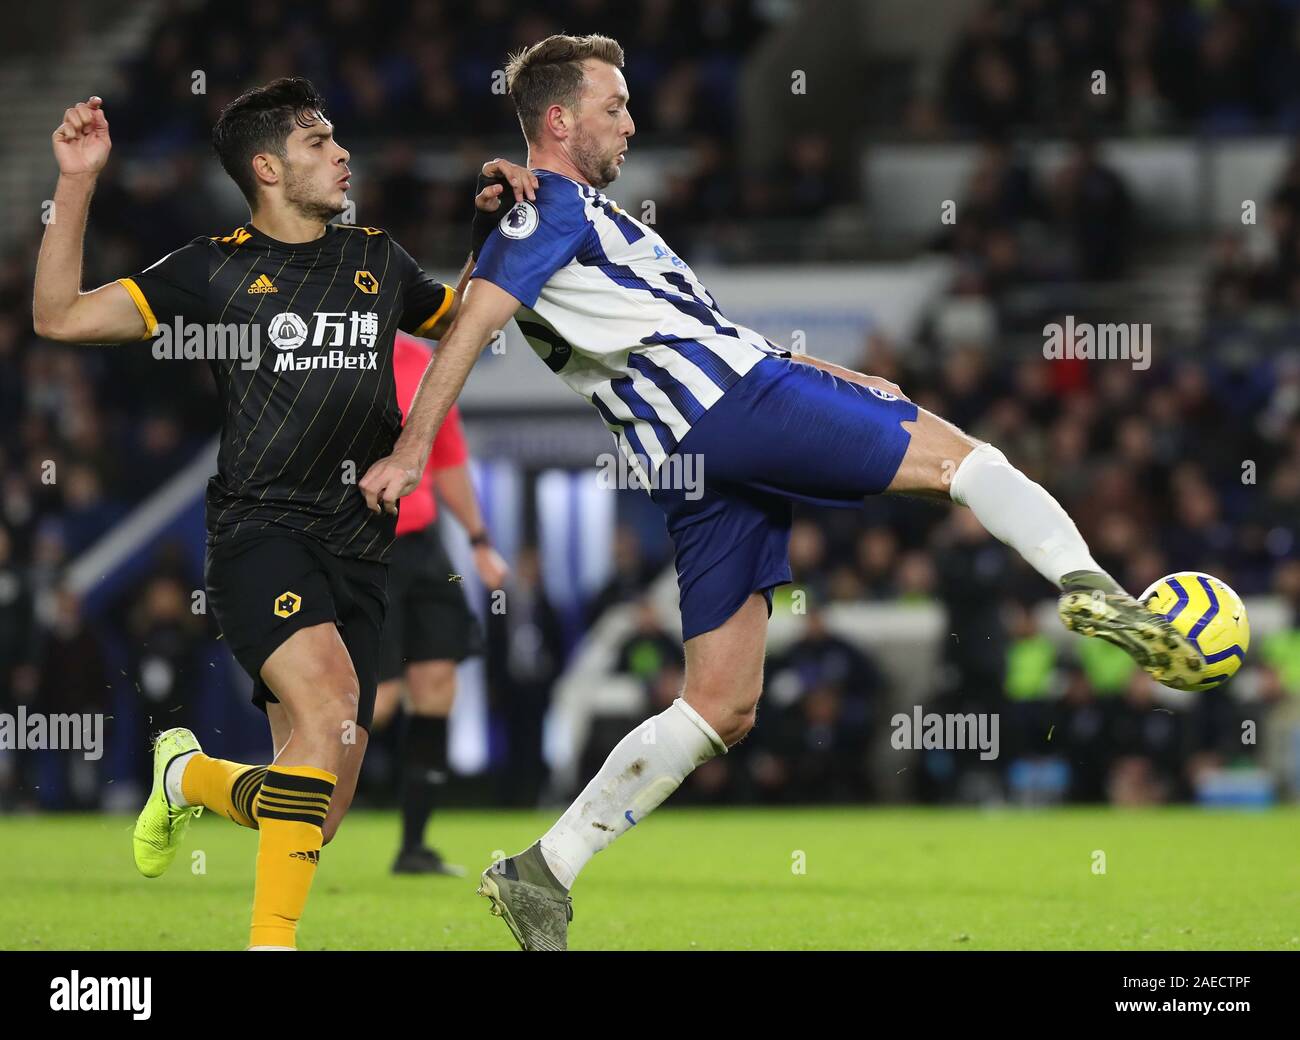 Brighton's Dale Stephens intercepts the ball during the Premier League match between Brighton & Hove Albion and Wolverhampton Wanderers at The Amex Stadium in Brighton. 08 December 2019 Stock Photo